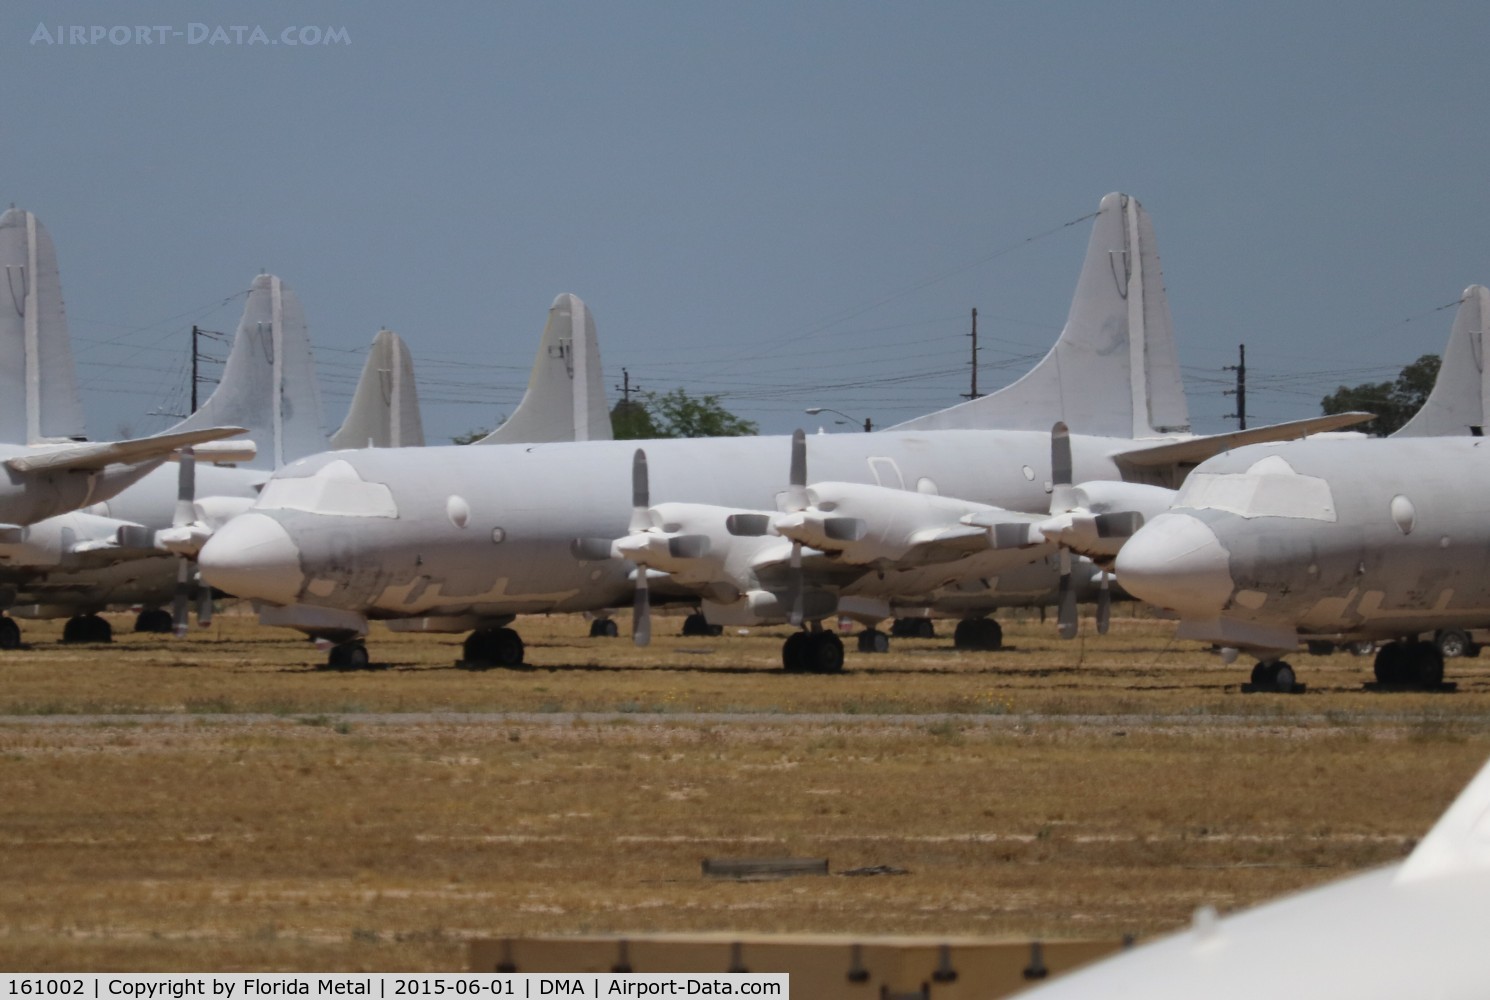 161002, Lockheed P-3C Orion C/N 285A-5684, P-3C Orion